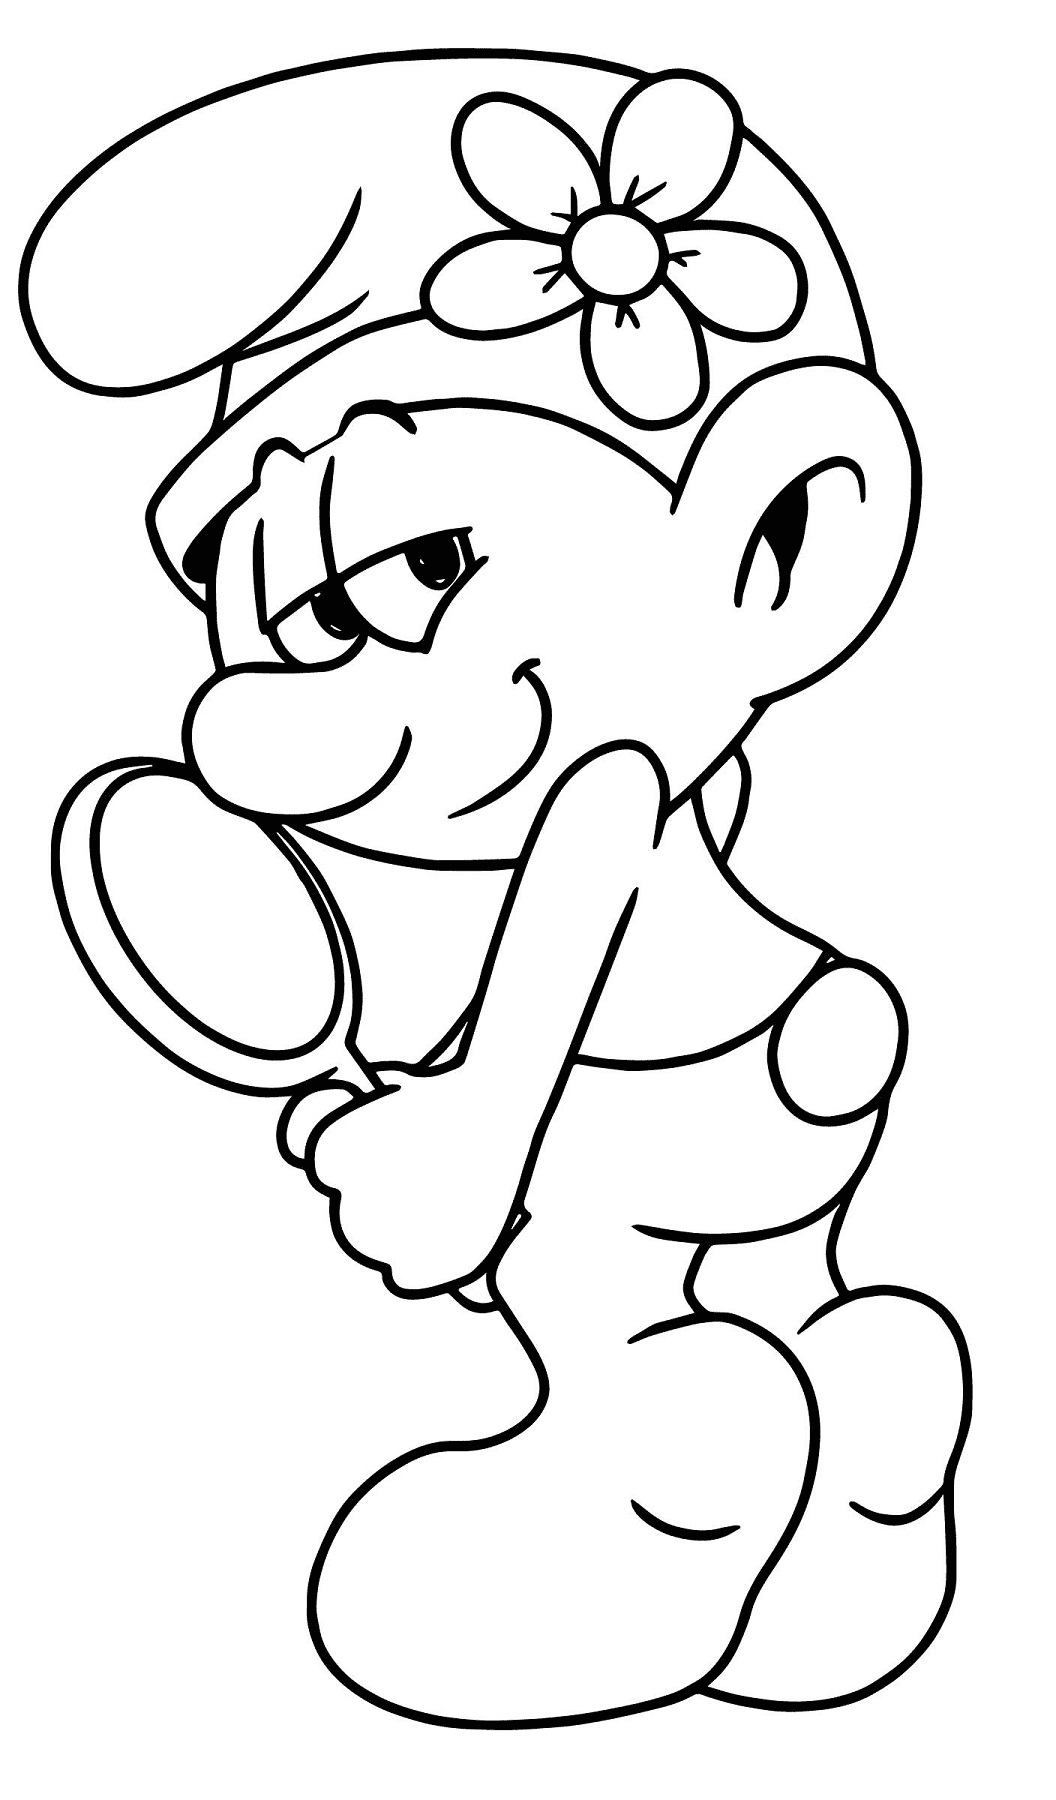 Cute Vanity Smurf Coloring Pages